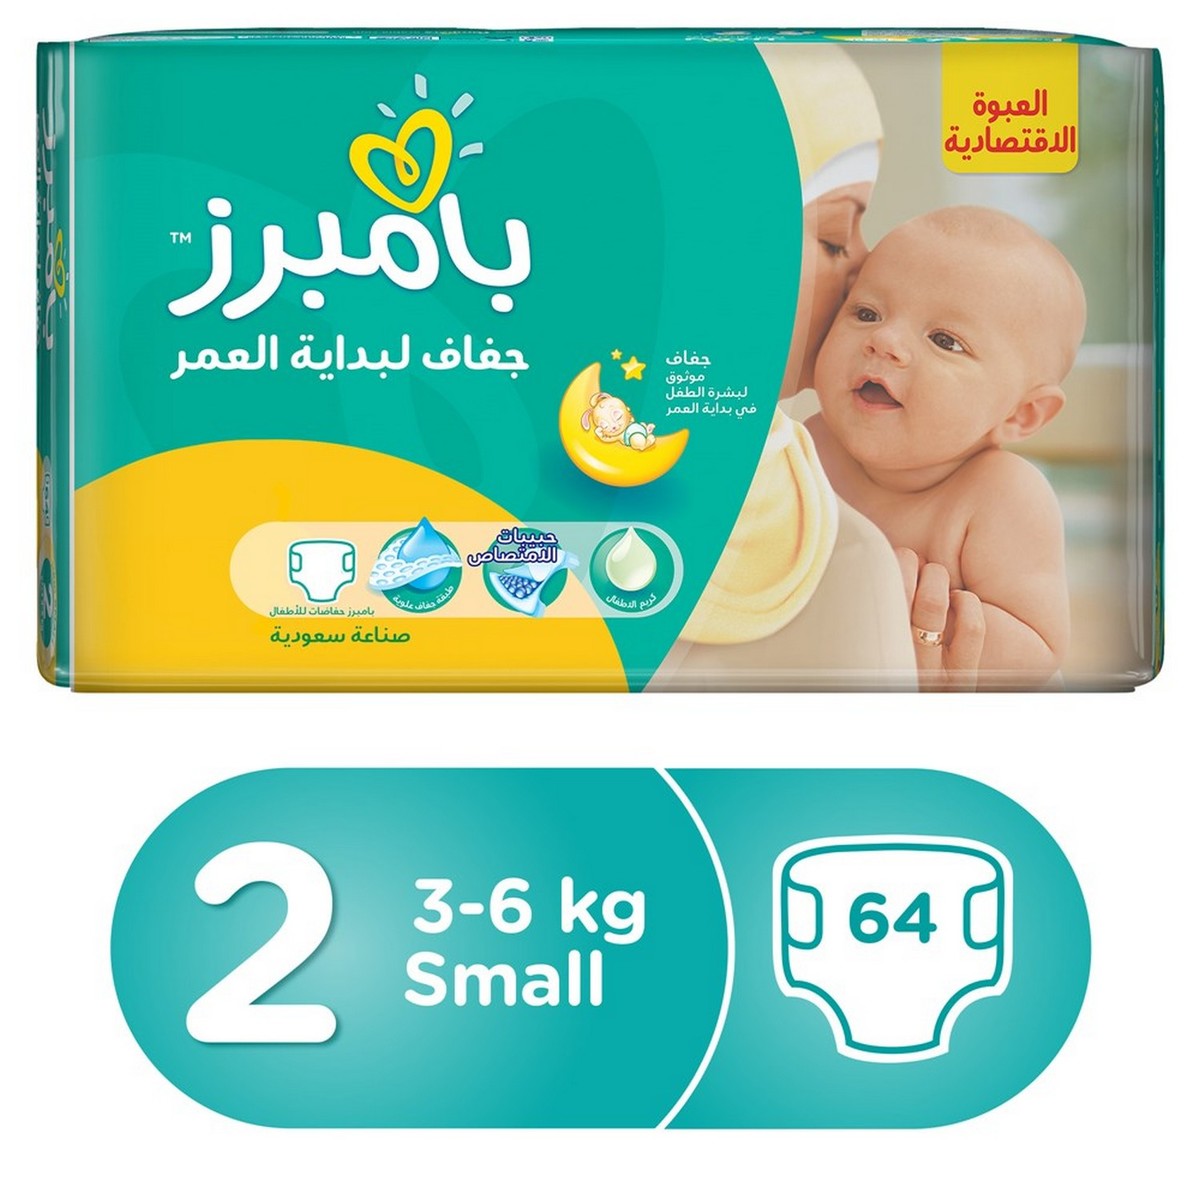 pampers active new baby 2 mini 3-6kg